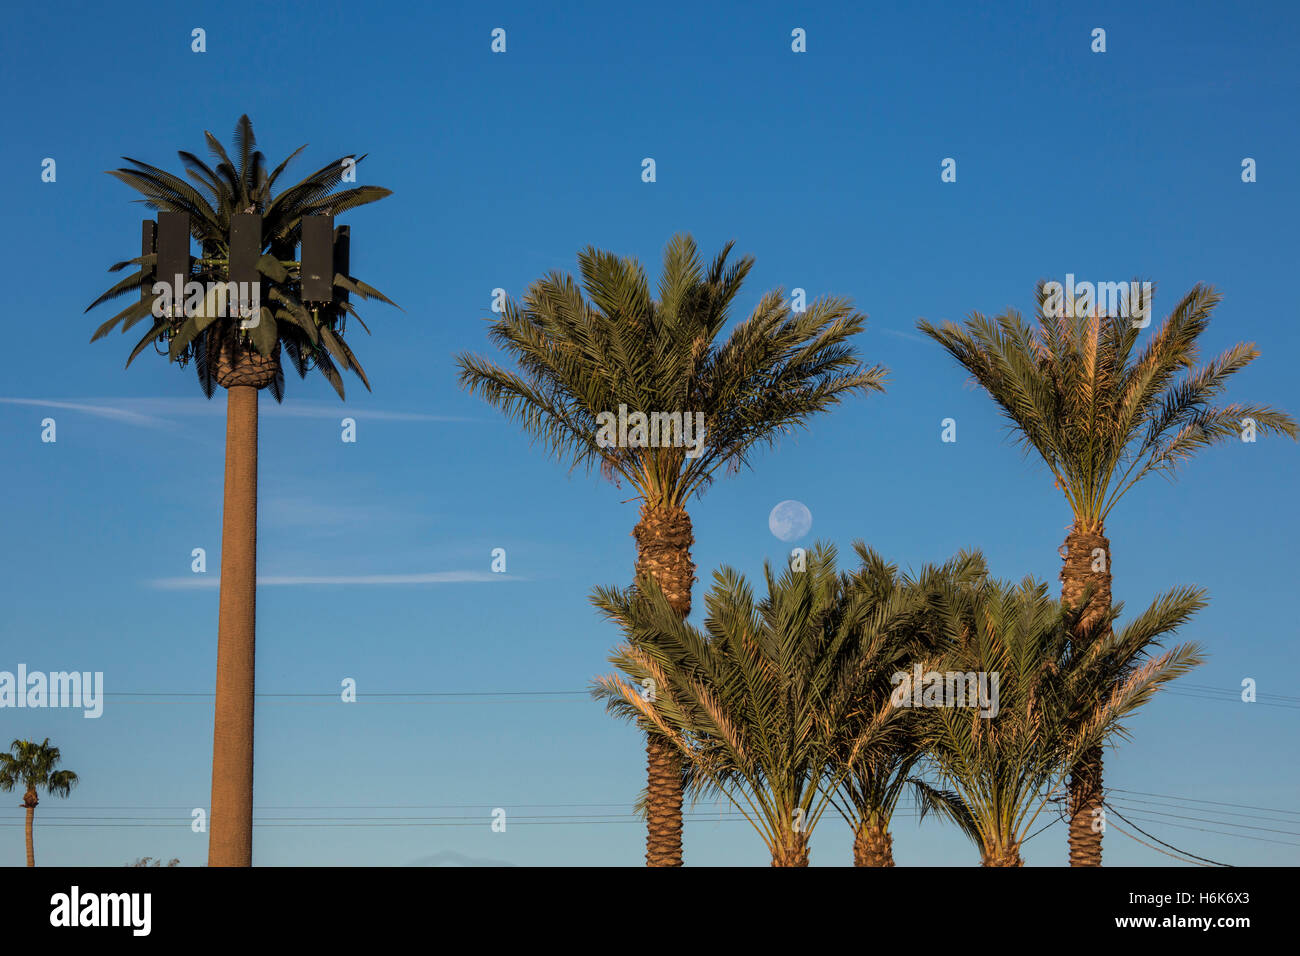 Yuma, Arizona - A cell phone tower disguised as a palm tree. Stock Photo